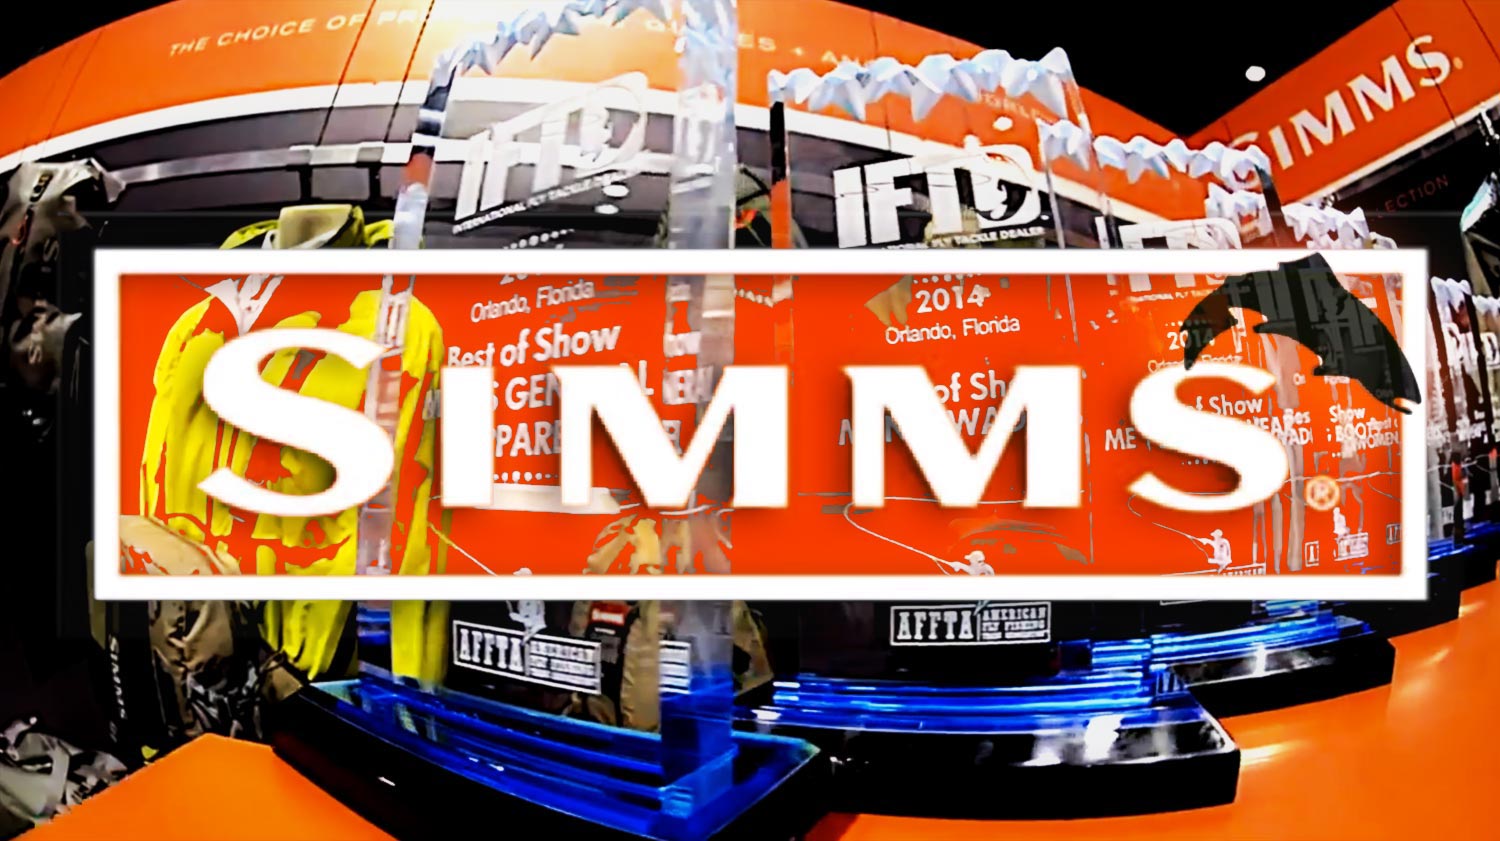 Innovative New Fly Fishing Packs From Simms - Fly Fishing, Gink and  Gasoline, How to Fly Fish, Trout Fishing, Fly Tying